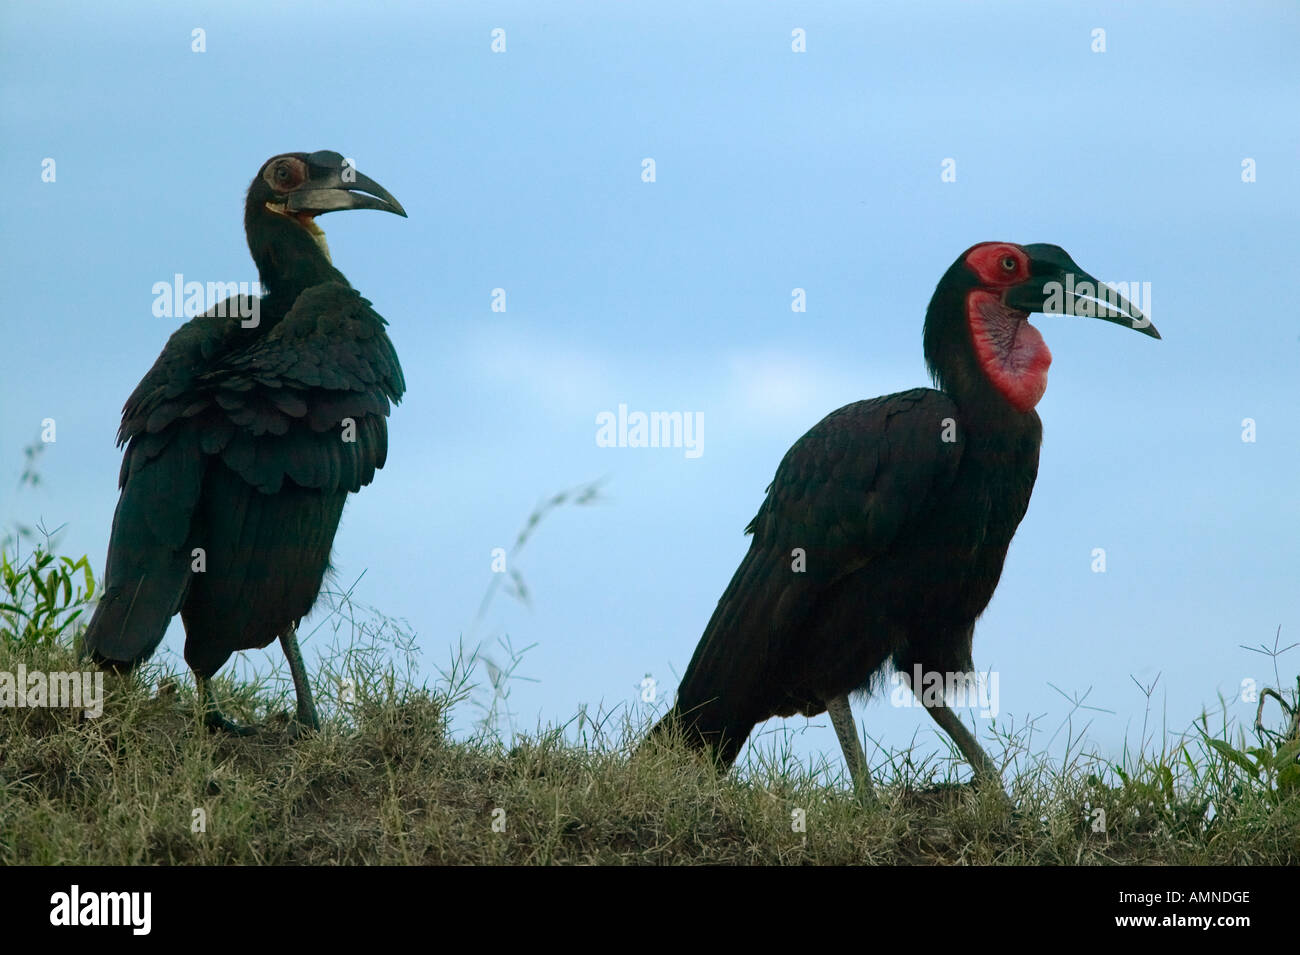 Ground Horn Bill birds with red neck in Masai Mara near Little Governor s camp in Kenya Africa Stock Photo